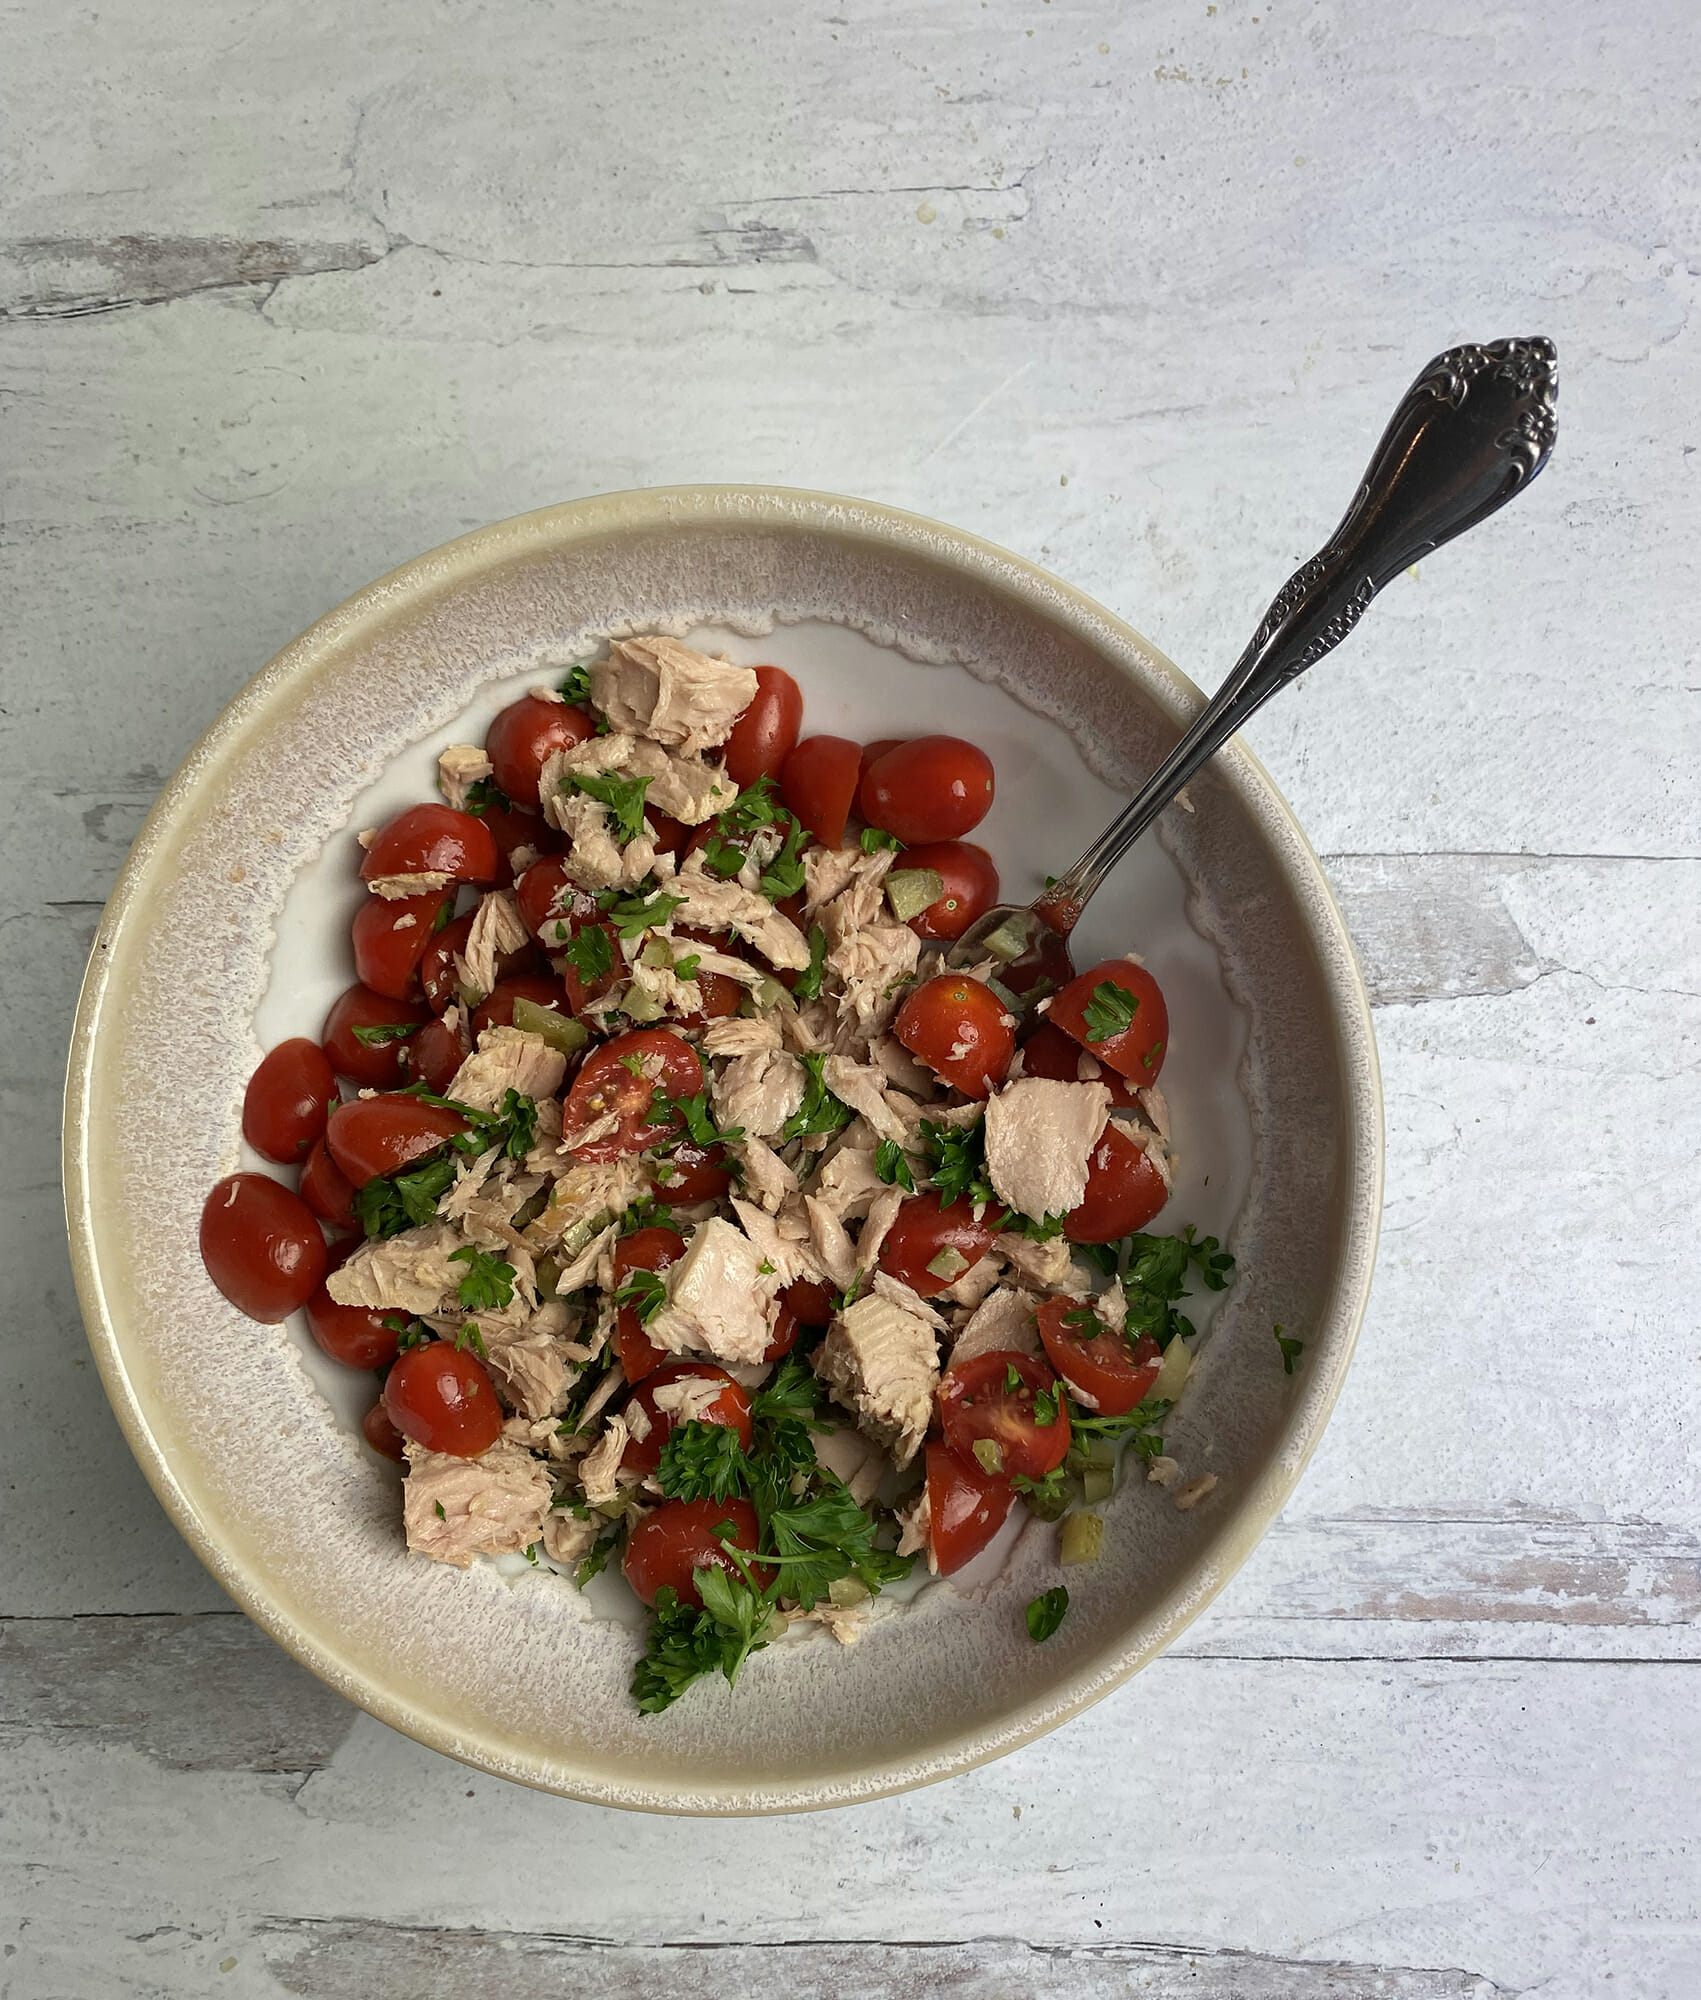 Tuna fish in a bowl with cherry tomatoes and parsley.